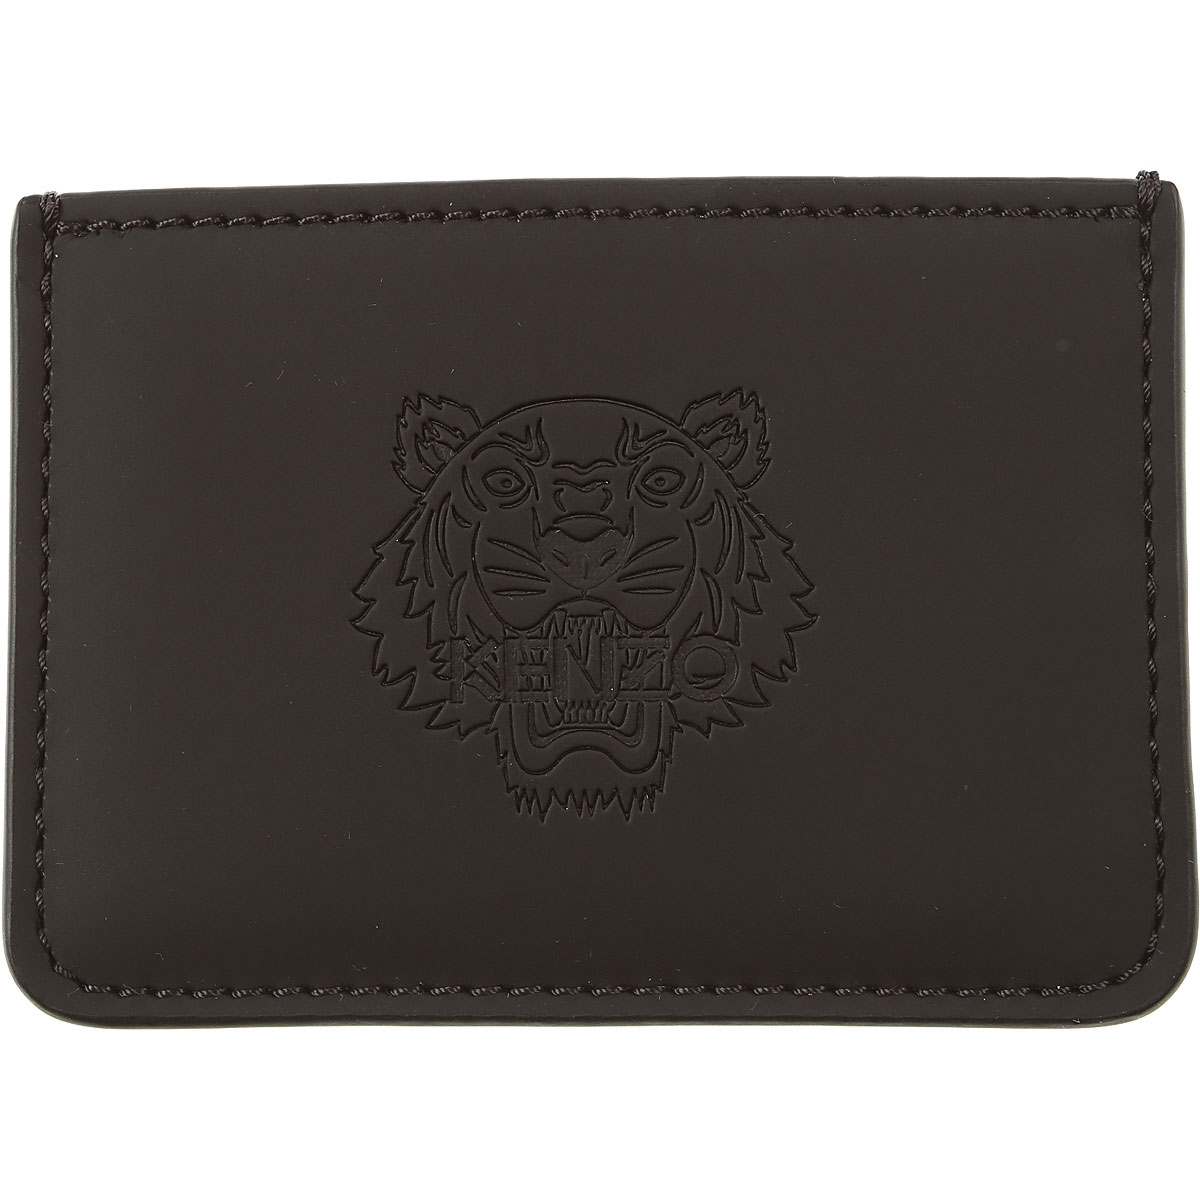 Mens Wallets Kenzo, Style code: 2pm600-f07-99